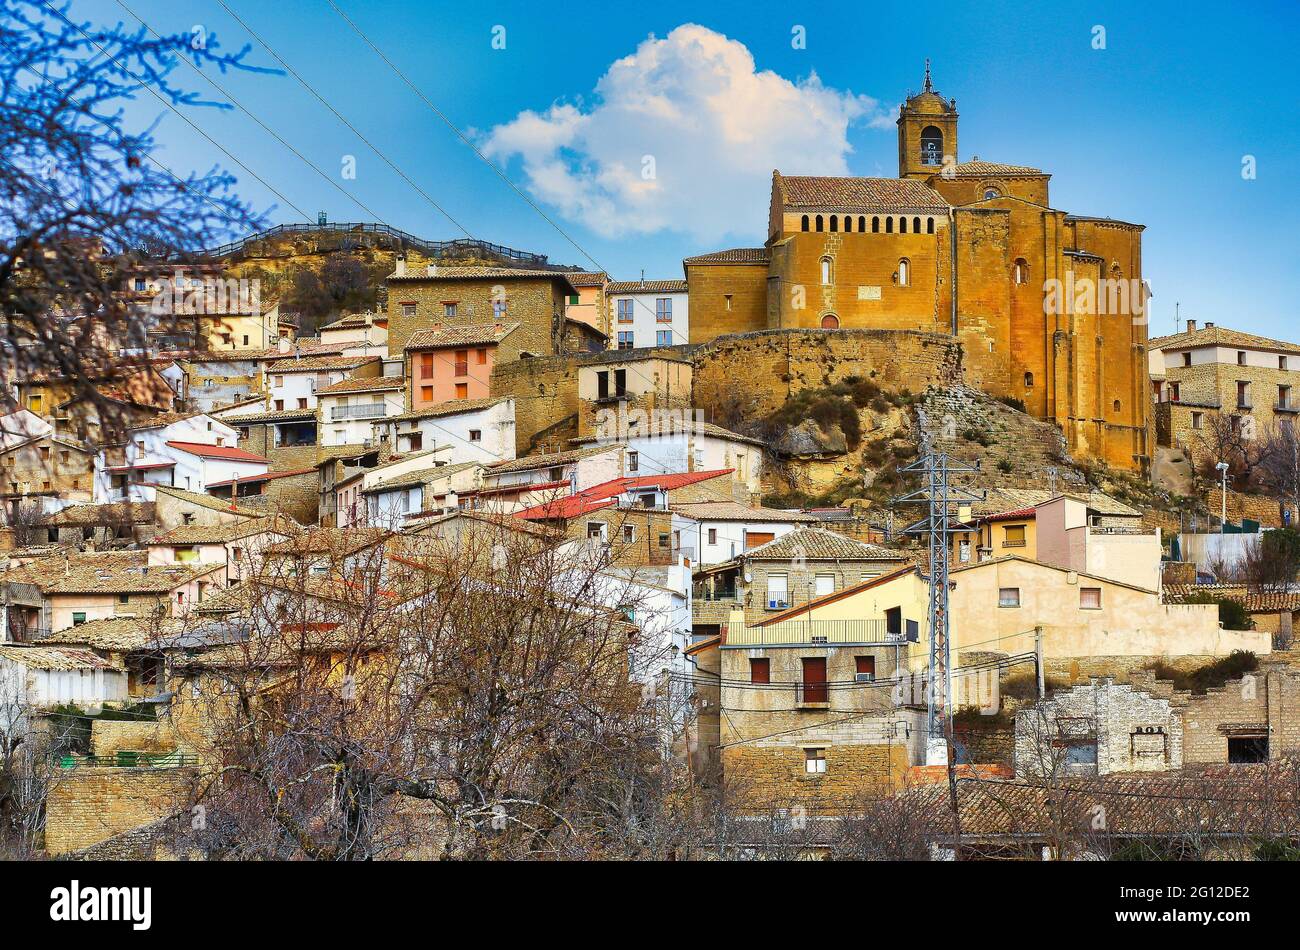 Riglos is a town belonging to the municipality of Las Peñas de Riglos, in the Hoya de Huesca region, located 45 km northwest of the city of Huesca, Stock Photo